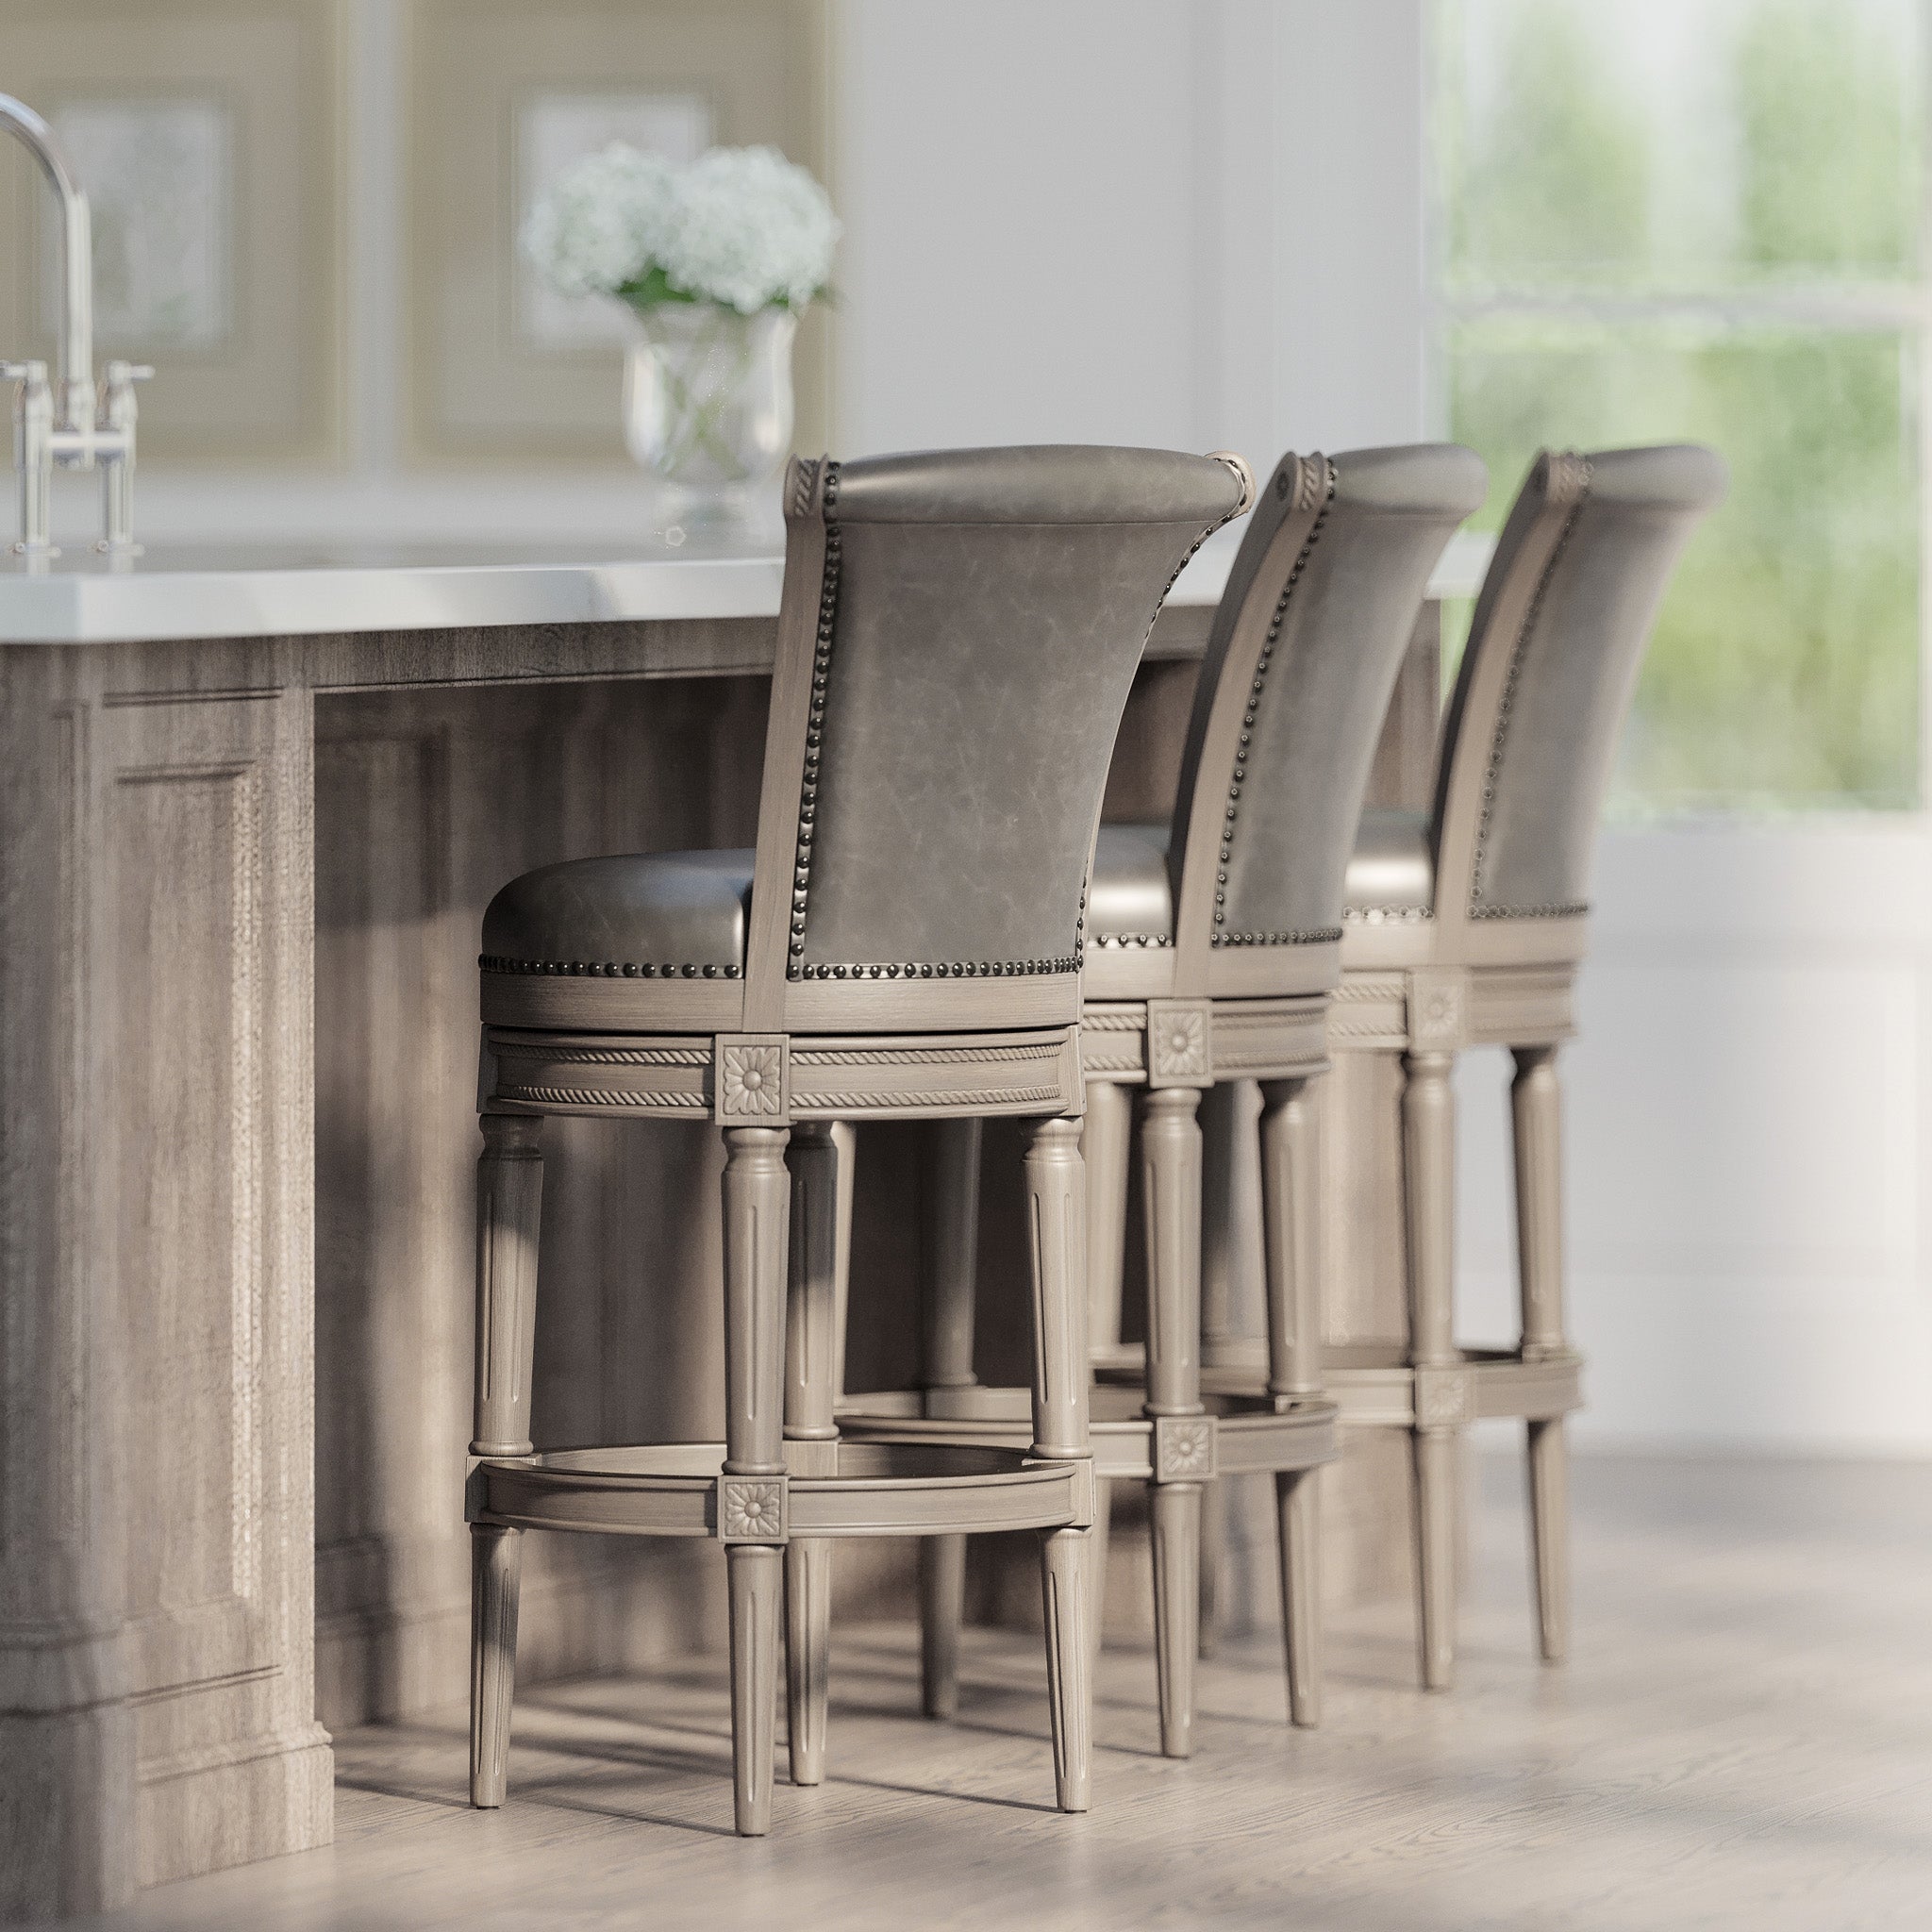 Pullman Bar Stool in Reclaimed Oak Finish with Ronan Stone Vegan Leather in Stools by Maven Lane